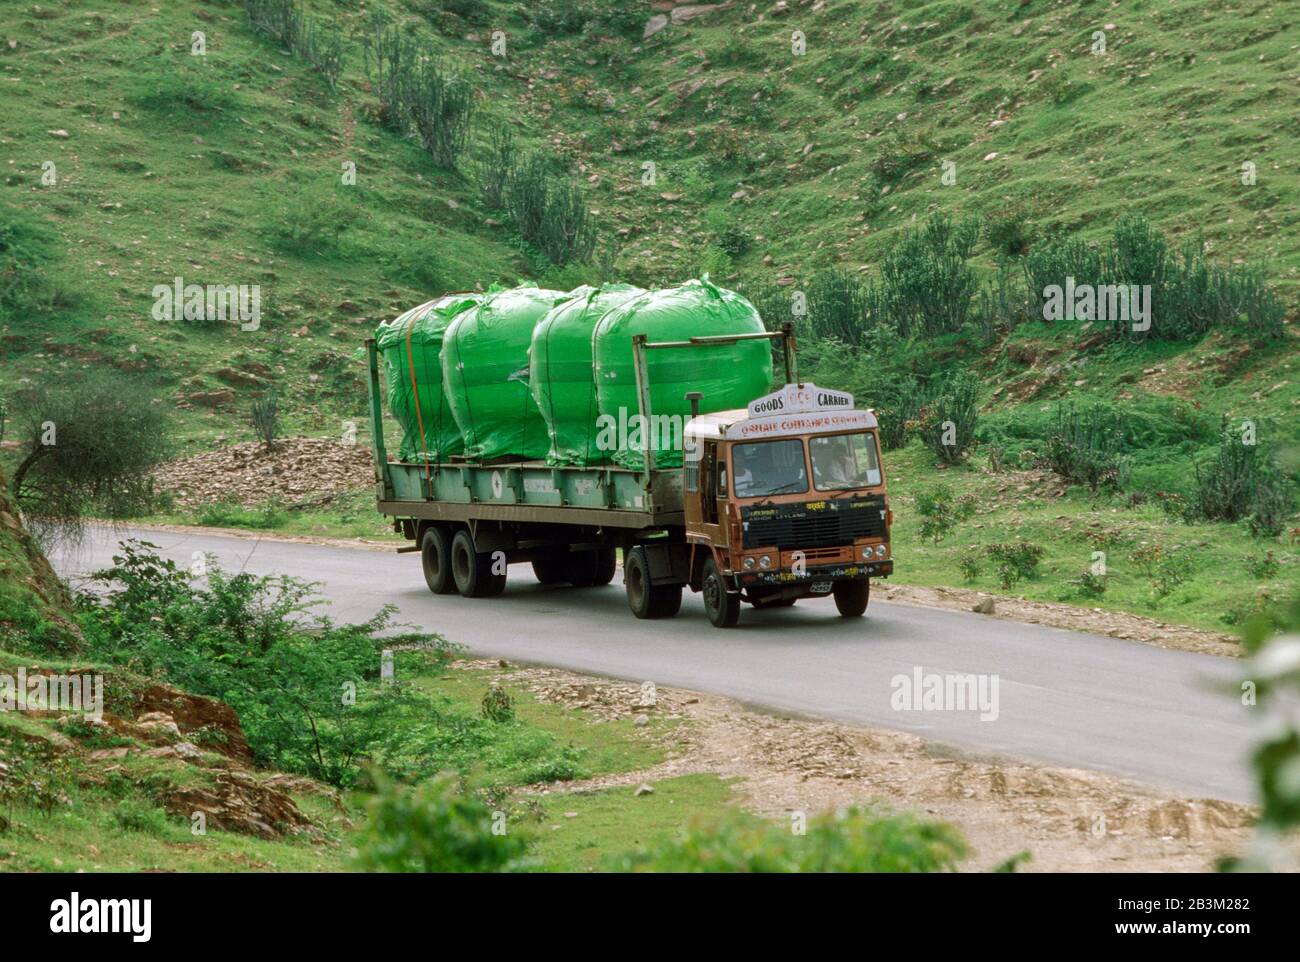 Trucks loaded with heavy goods, rajasthan, India, Asia Stock Photo